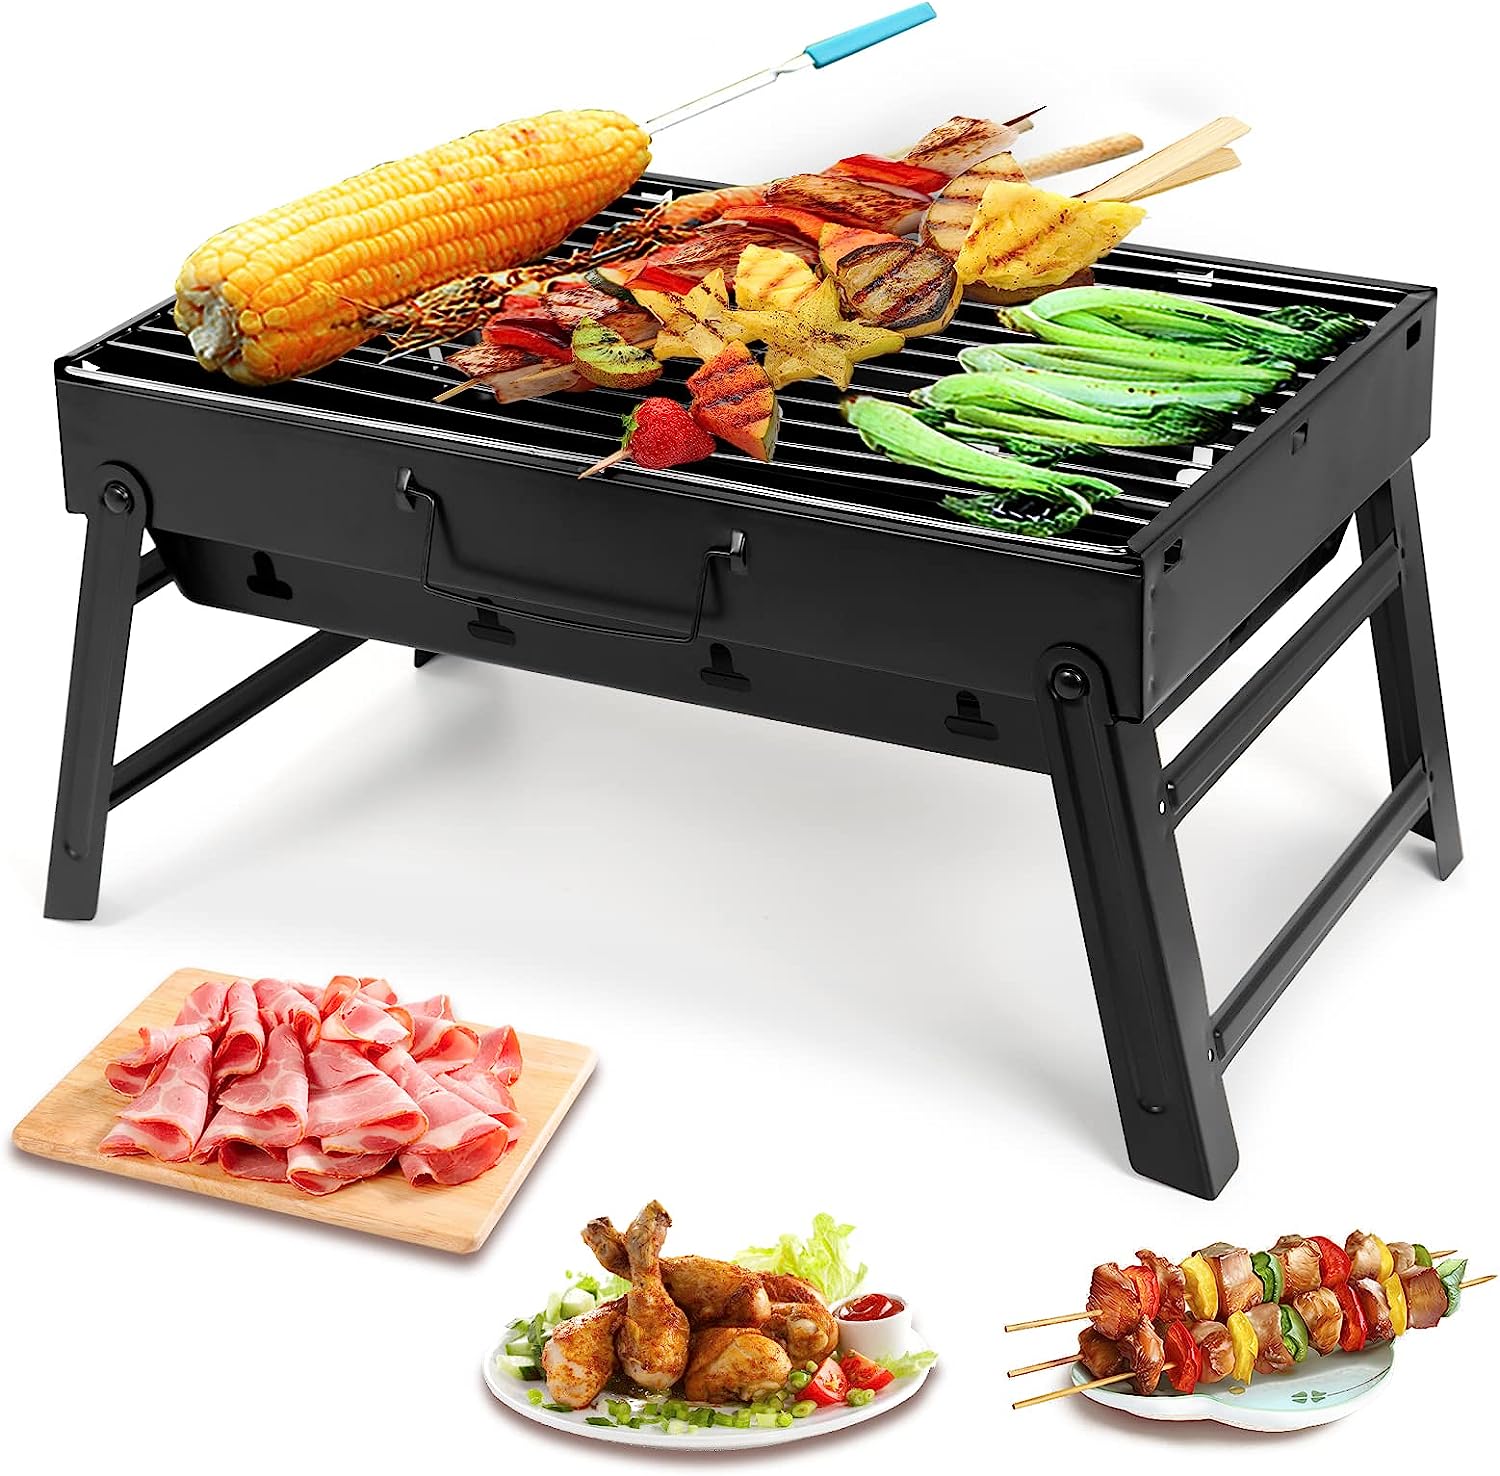 Barbecue Grill, Charcoal Grill Folding Portable [...]